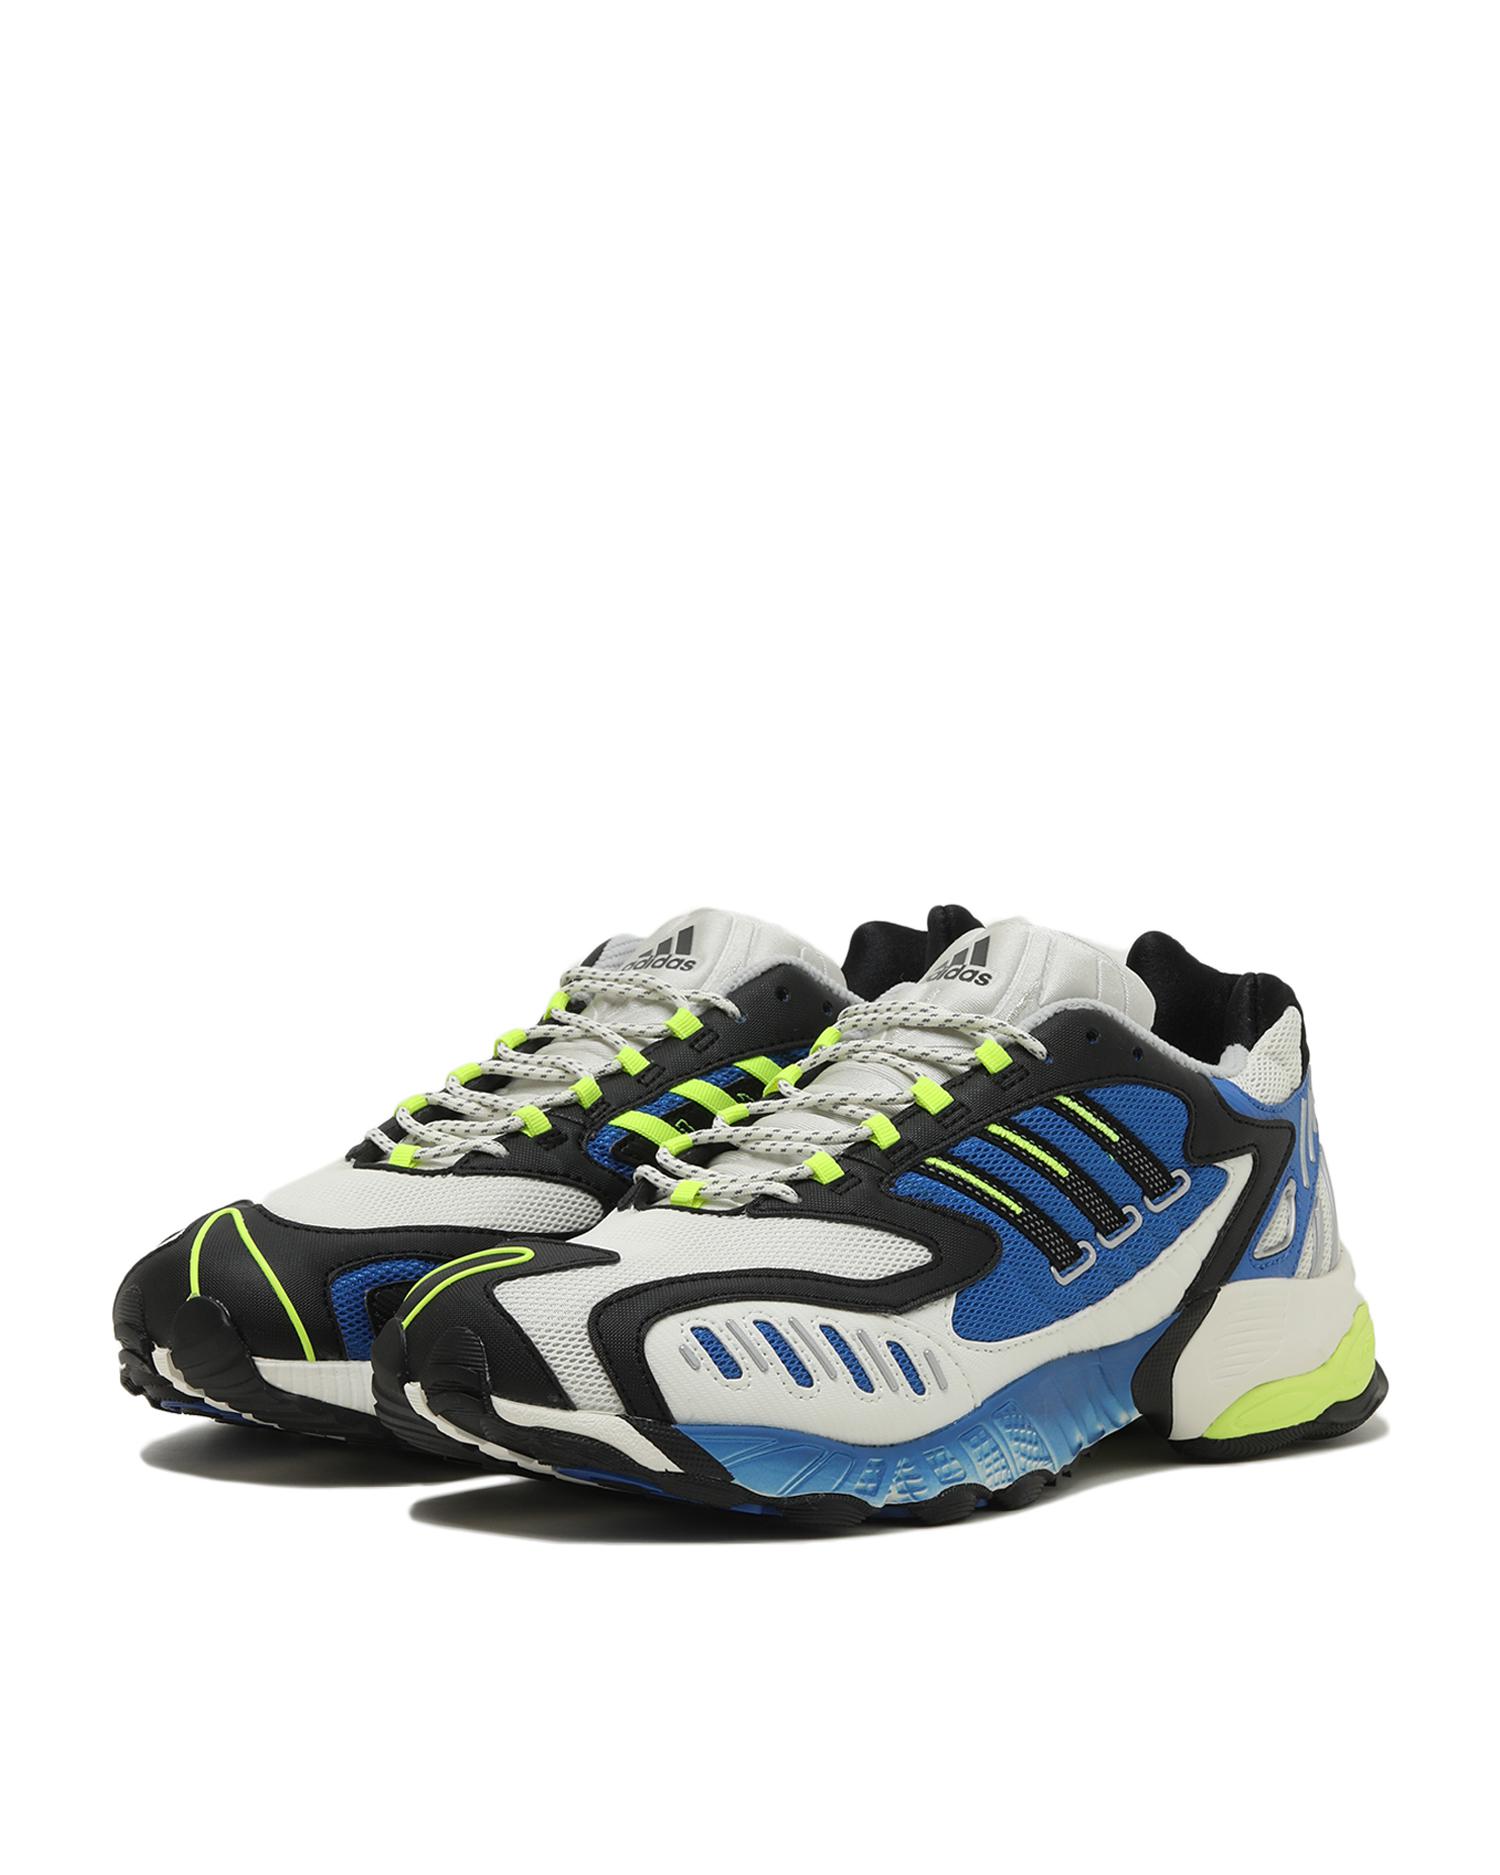 Torsion TRDC sneakers by ADIDAS